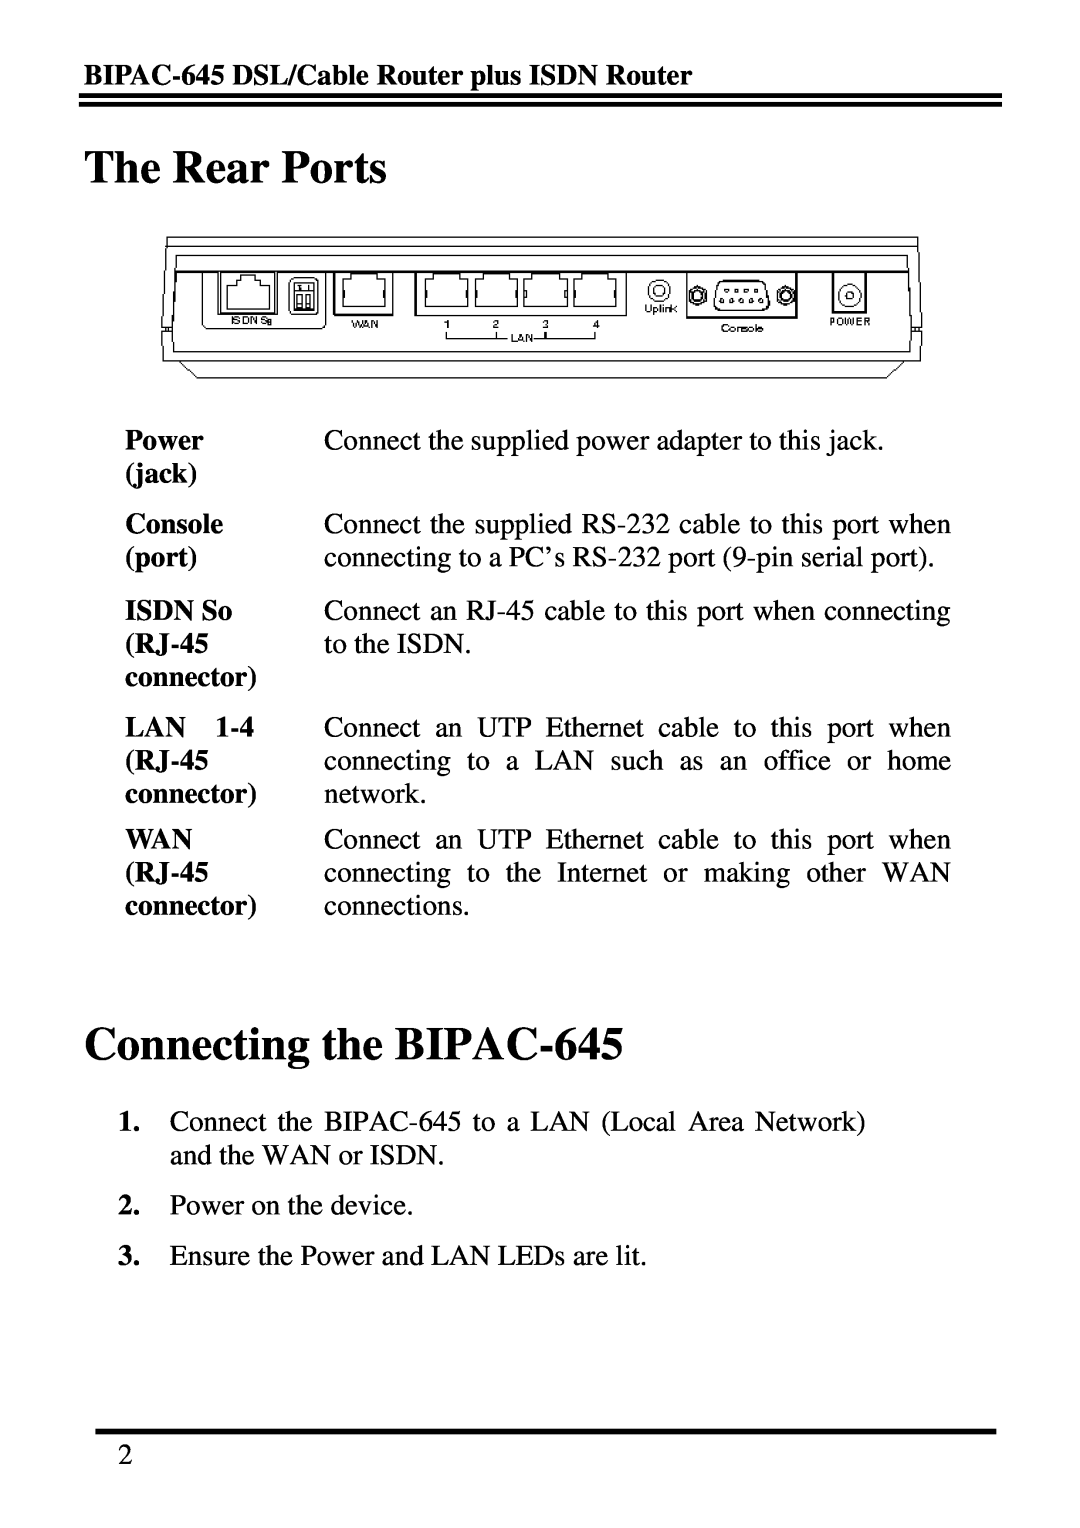 Billion Electric Company The Rear Ports, Connecting the BIPAC-645, BIPAC-645 DSL/Cable Router plus ISDN Router, jack 